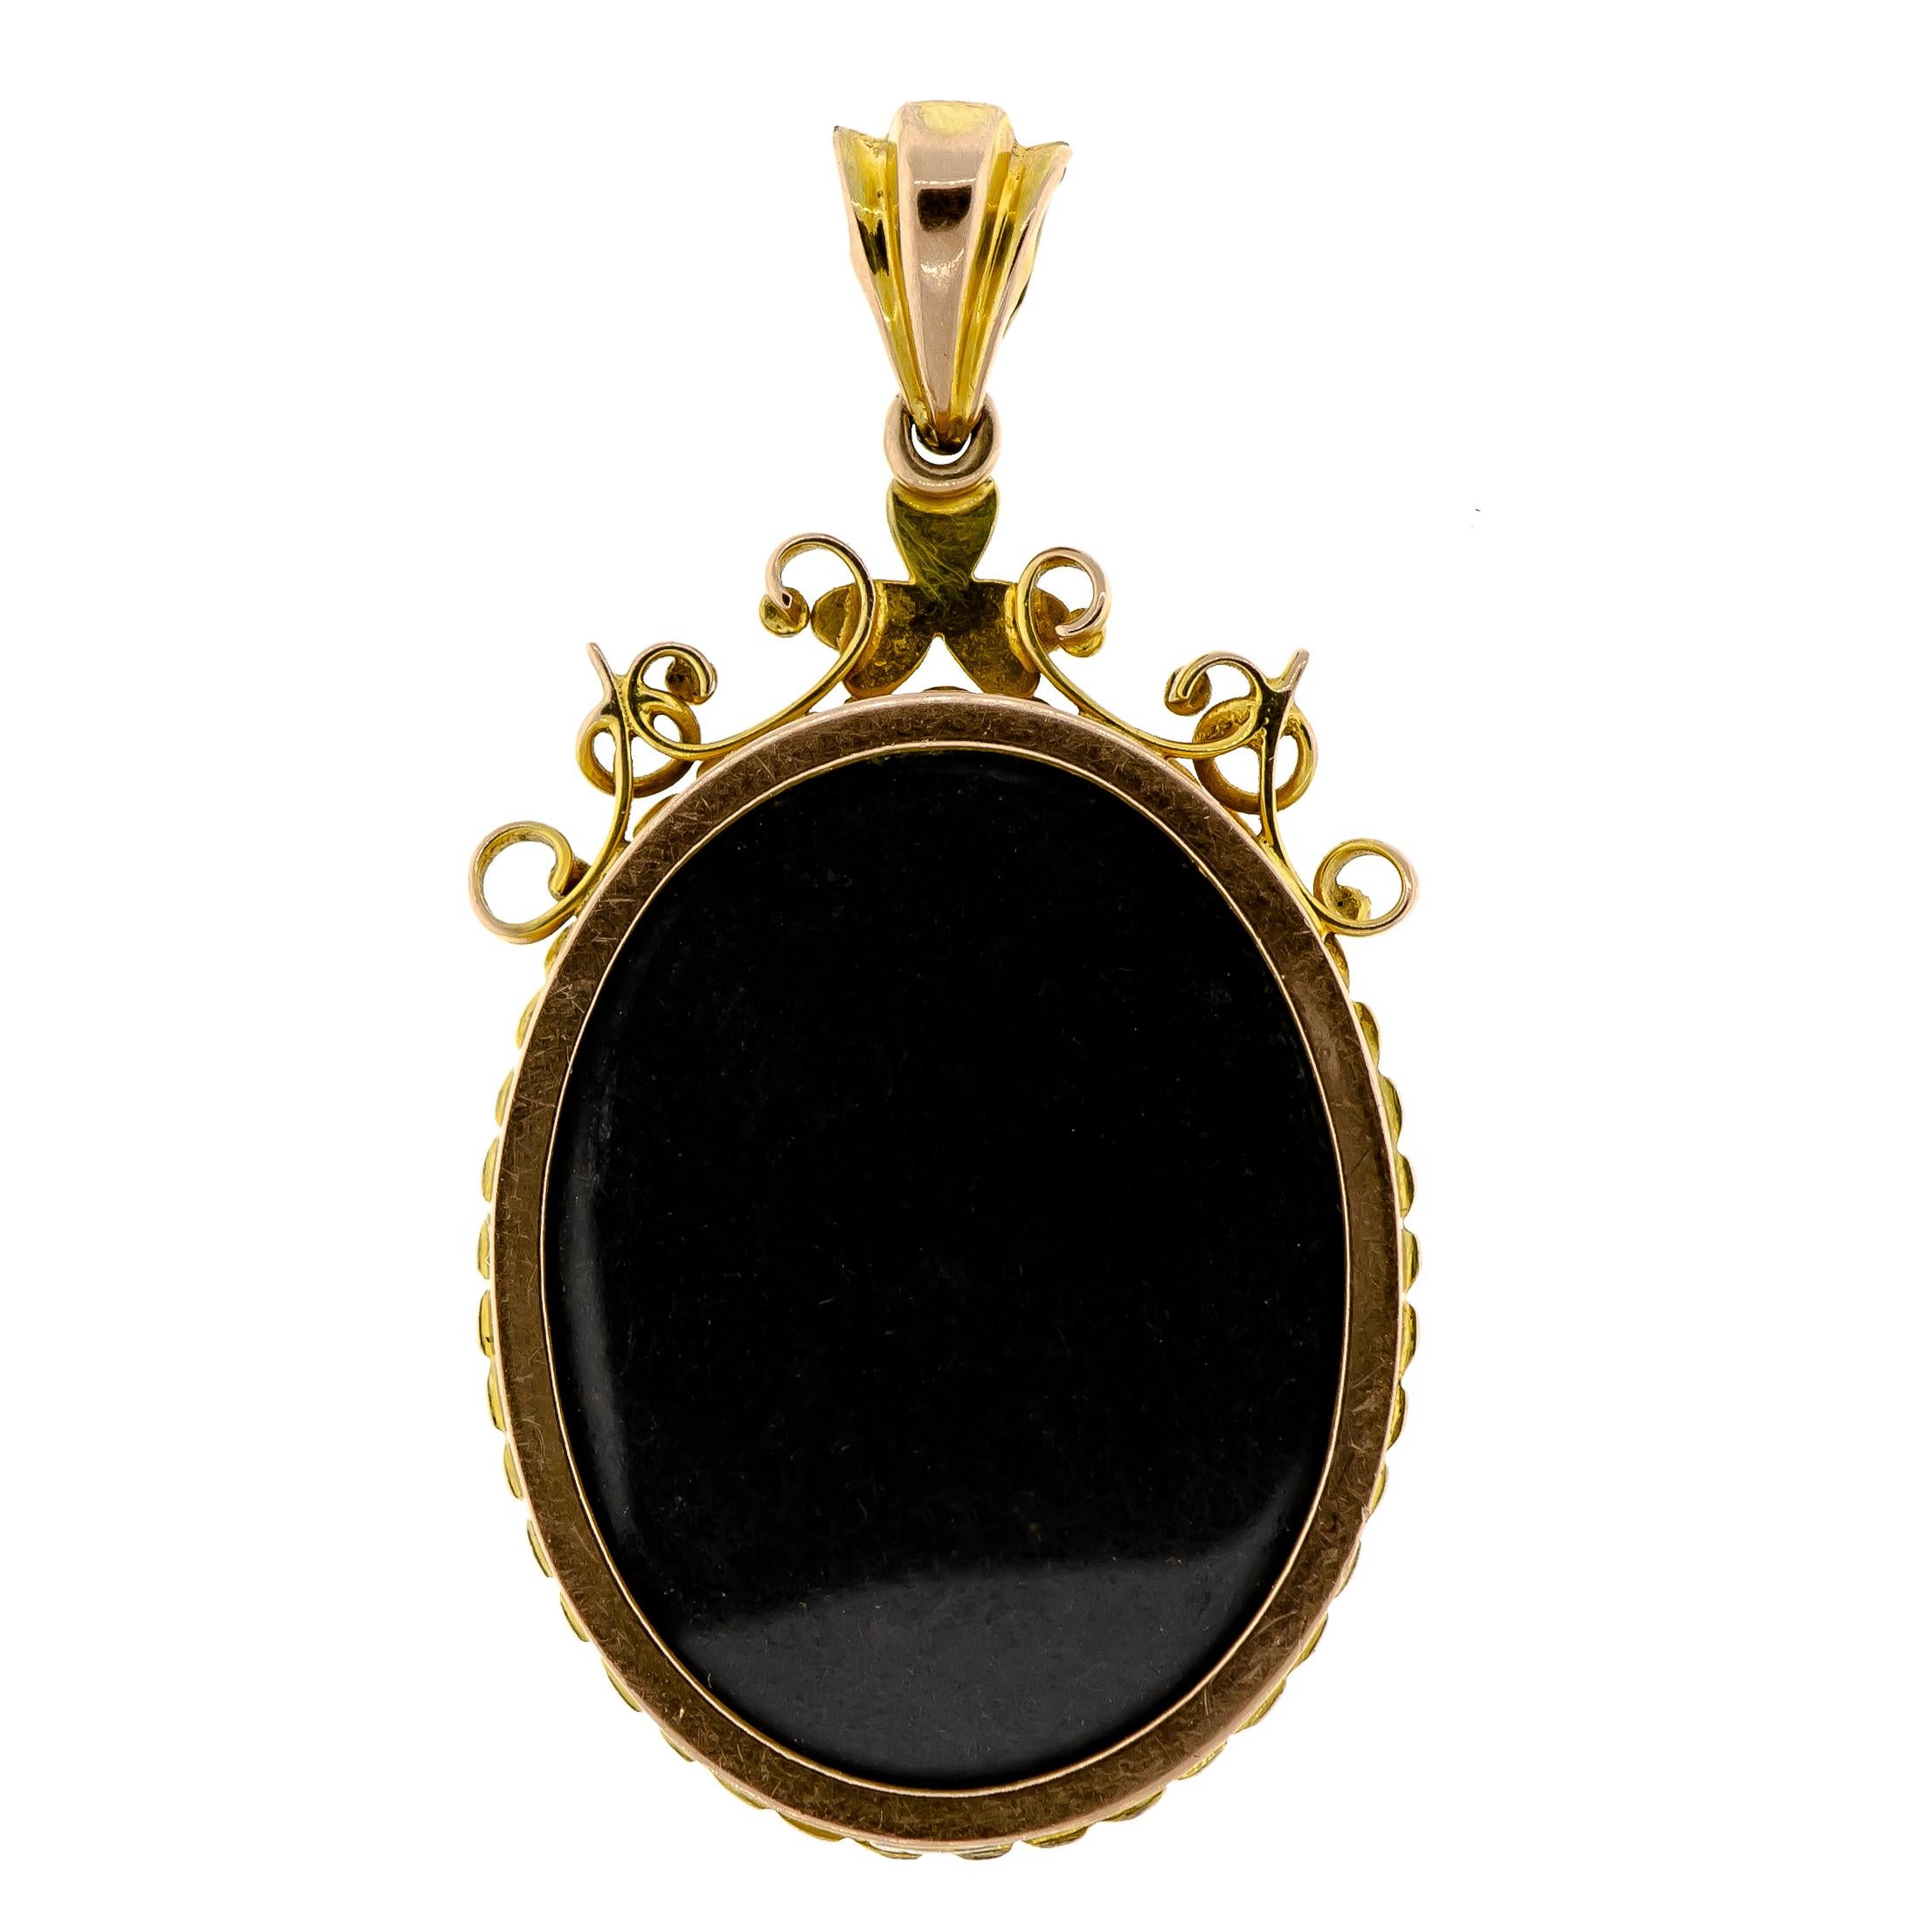 Turn-of-the-Century antique enamel and pearl miniature locket containing one (1) oval French enamel locket of a Woman in Profile set into an ornate pearl and yellow gold frame, glazed locket back.